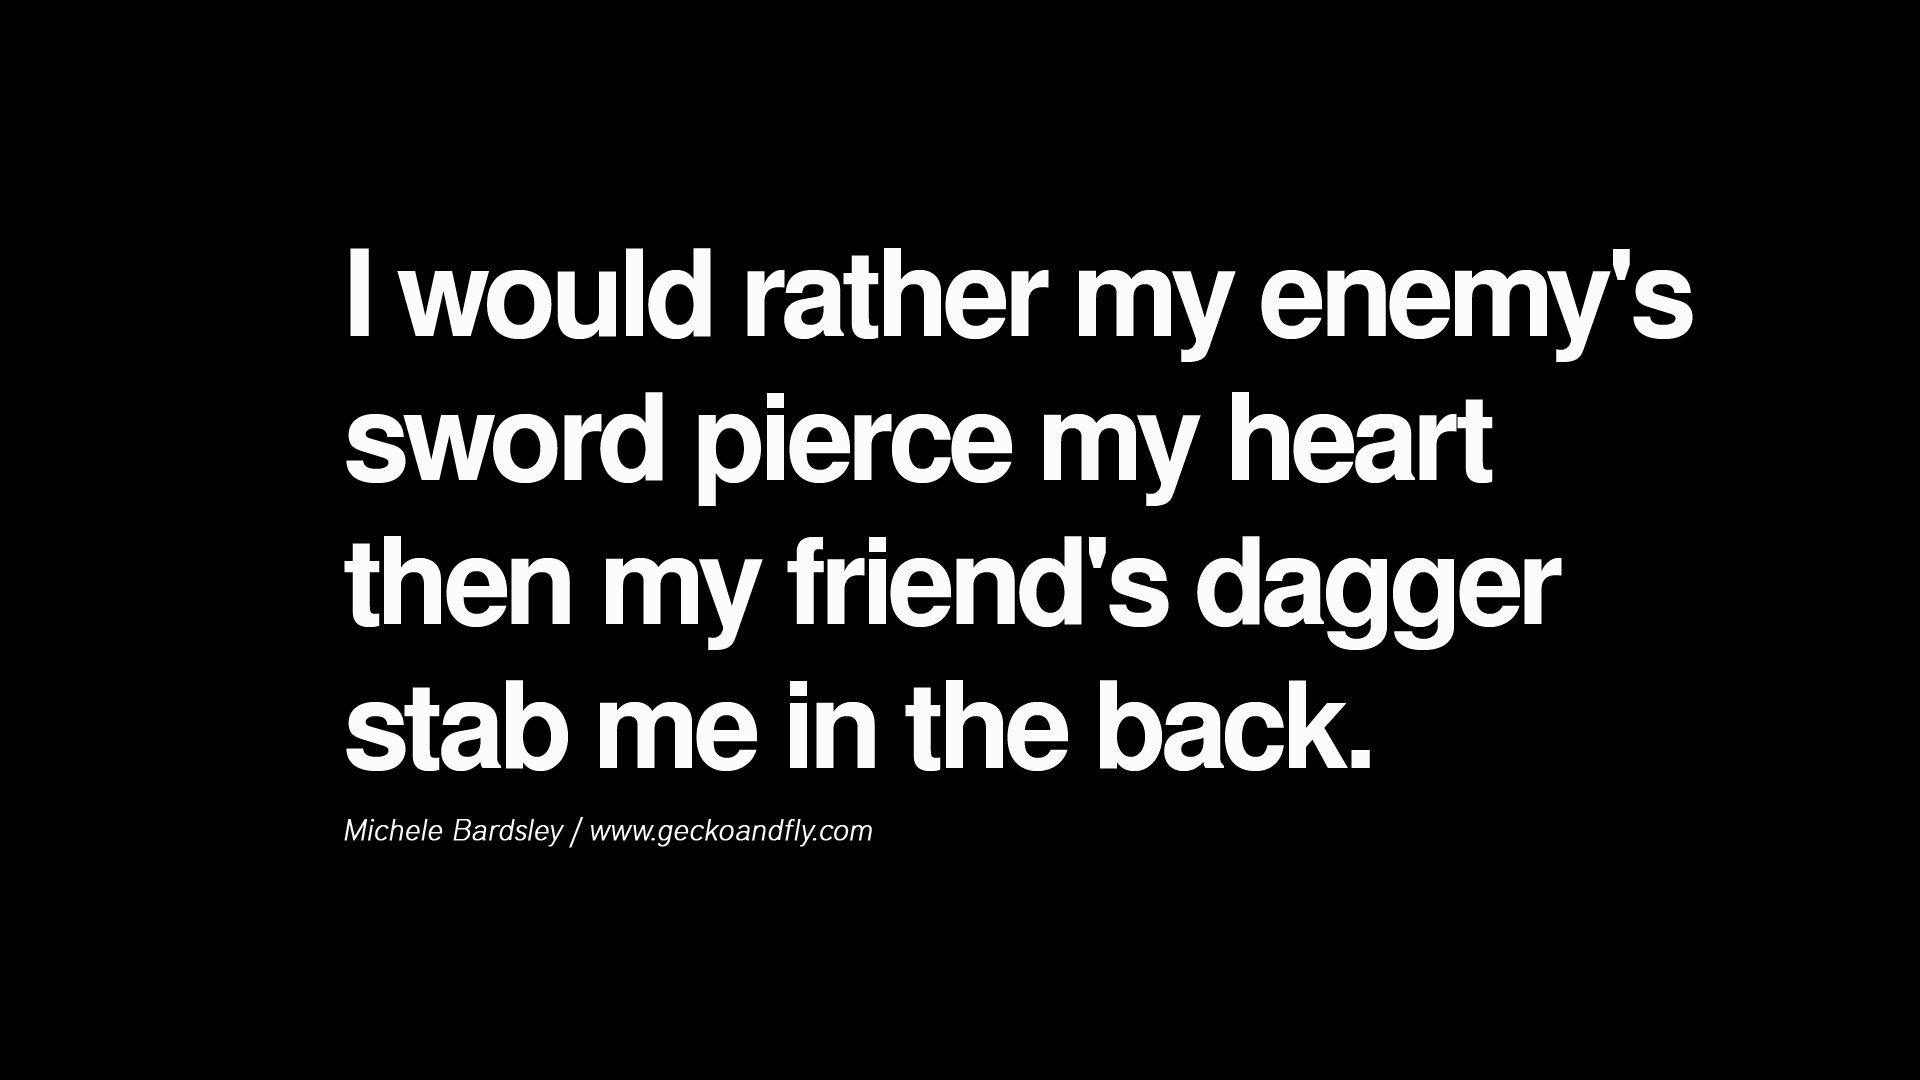 sword stabbing Quotes. Betrayal quotes, Fake friend quotes, Trust issues quotes